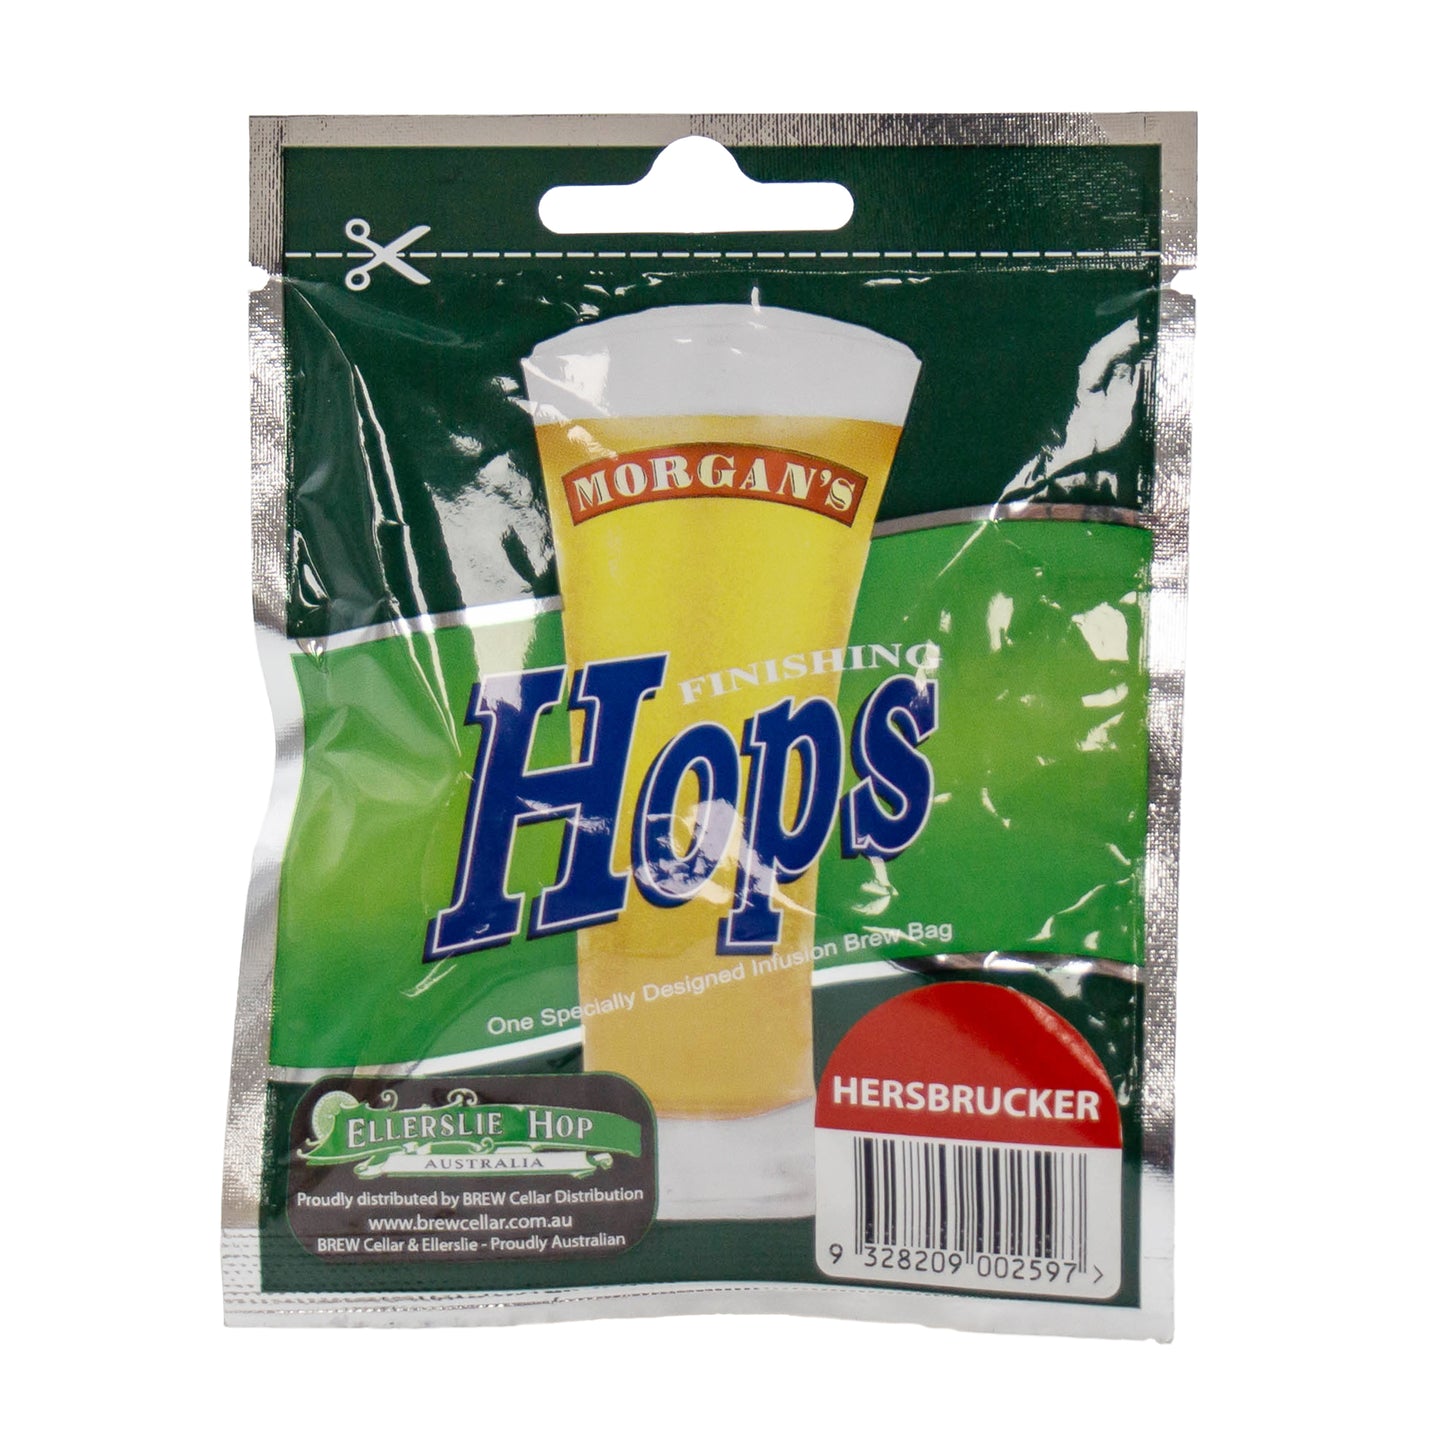 12g packet of Hersbrucker hops for home brewing